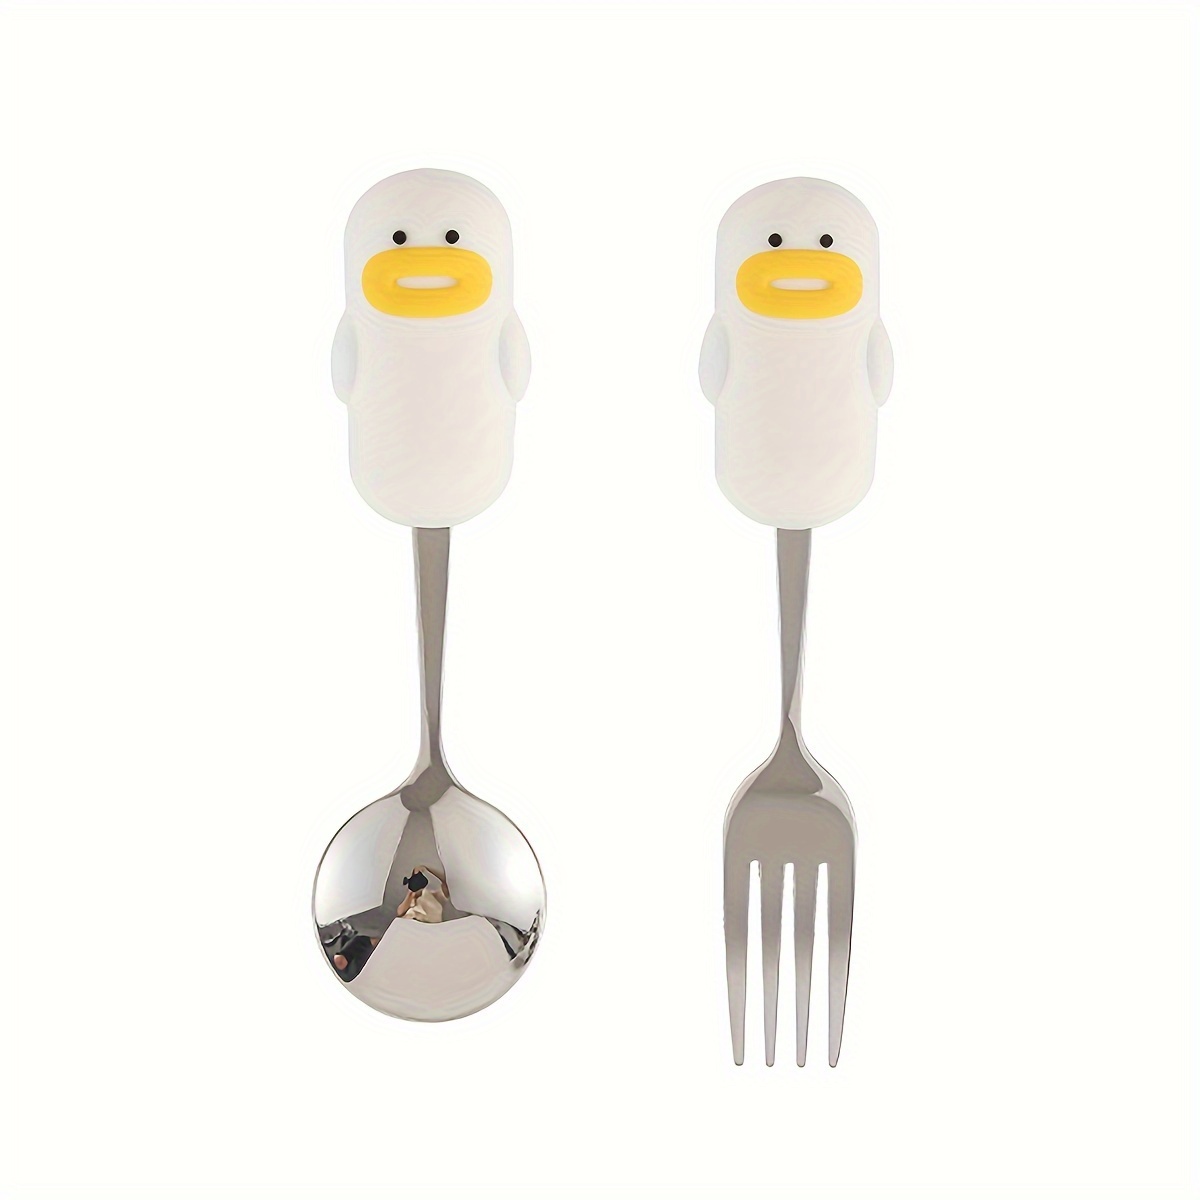 Stainless Steel Toddler Fork and Spoon - Set of 10